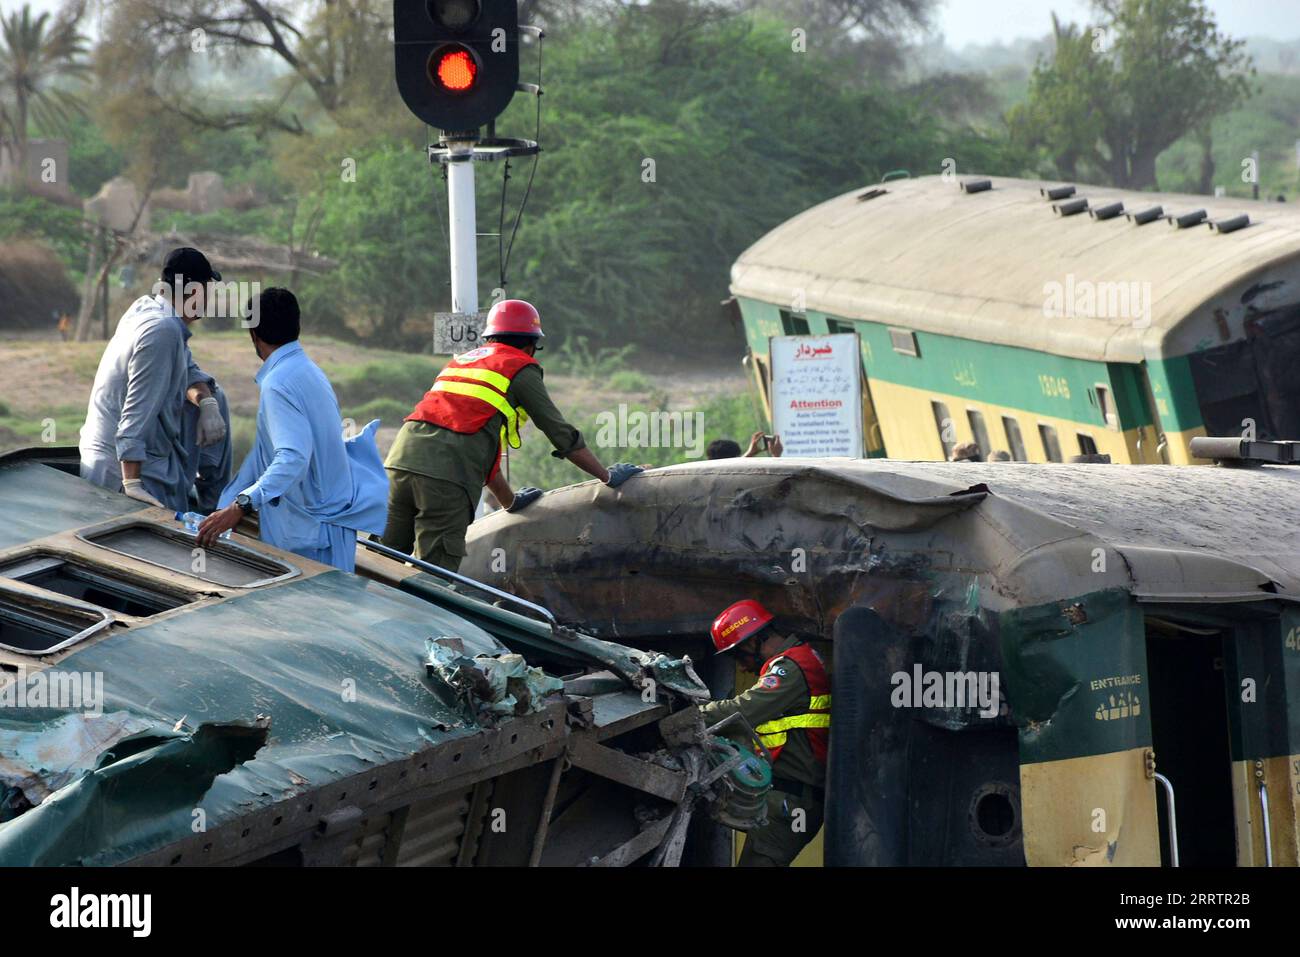 230807 -- SANGHAR, Aug. 7, 2023 -- Rescuers search for victims on derailed coaches of a passenger train in Sanghar district of Pakistan s southern Sindh province, on Aug. 6, 2023. At least 22 people were killed and over 50 others injured on Sunday after a passenger train derailed in the Sanghar district of Pakistan s southern Sindh province, local police said. The accident took place when 10 coaches of the Hazara Express train derailed when it was crossing a canal bridge near Sarhari town in the Shahdadpur area of the district, Muhammad Younis Chandio, deputy inspector general of police of the Stock Photo